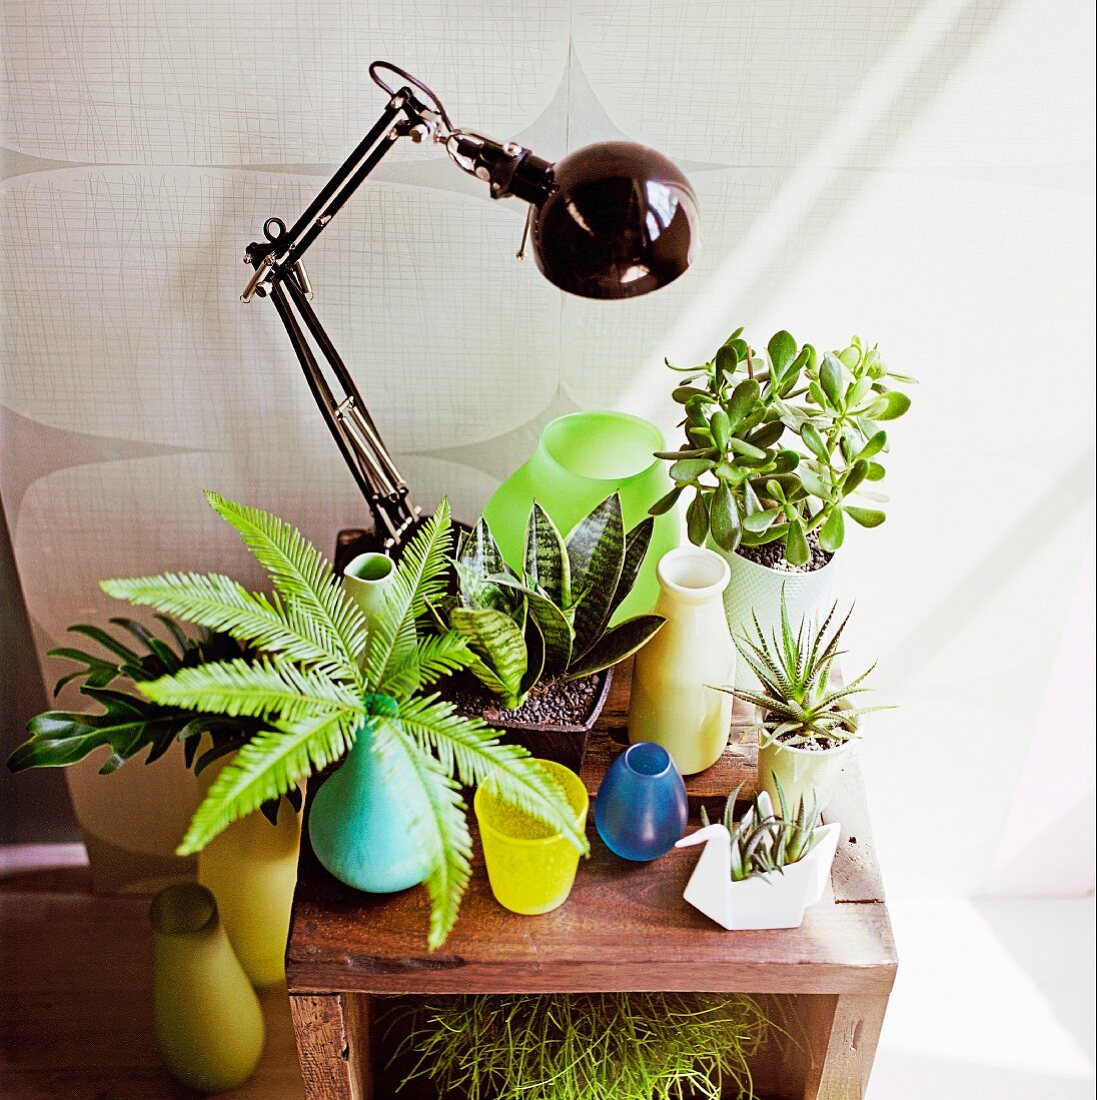 Colorful vases with green plants on wooden shelf